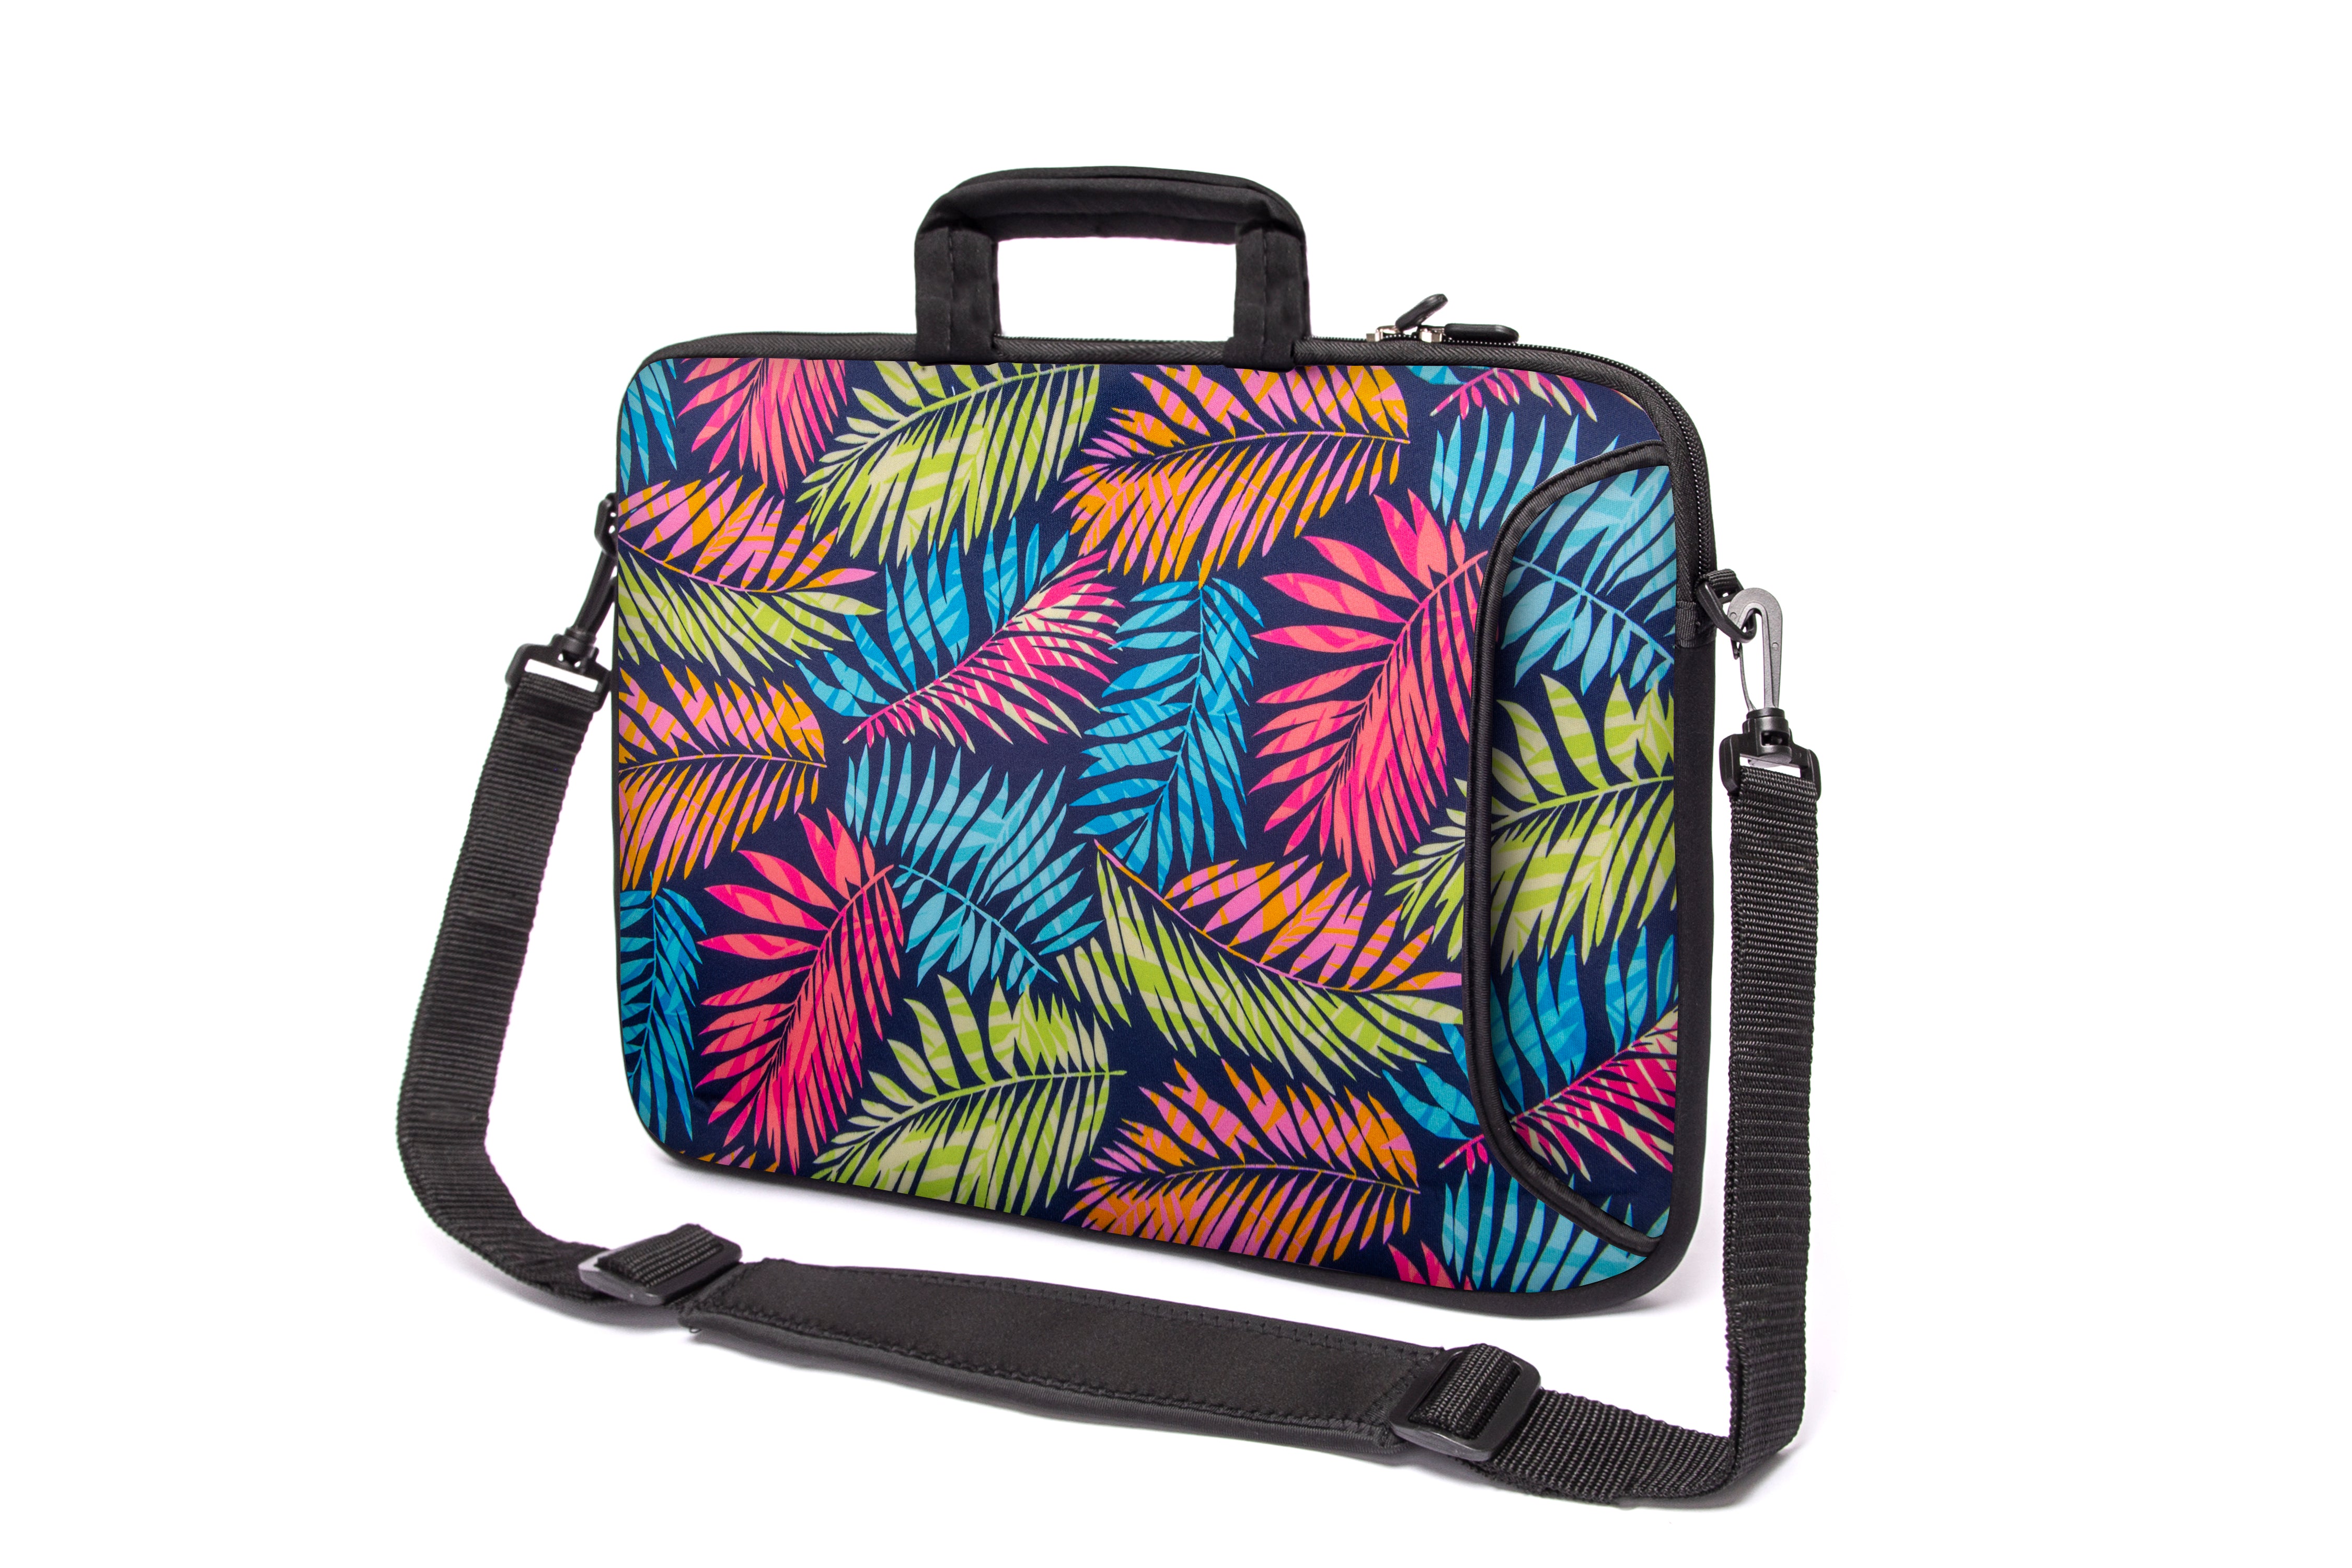 15"- 15.6" (inch) LAPTOP BAG CARRY CASE/BAG WITH HANDLE & STRAP NEOPRENE FOR LAPTOPS/NOTEBOOKS, *Colourful Leaves*